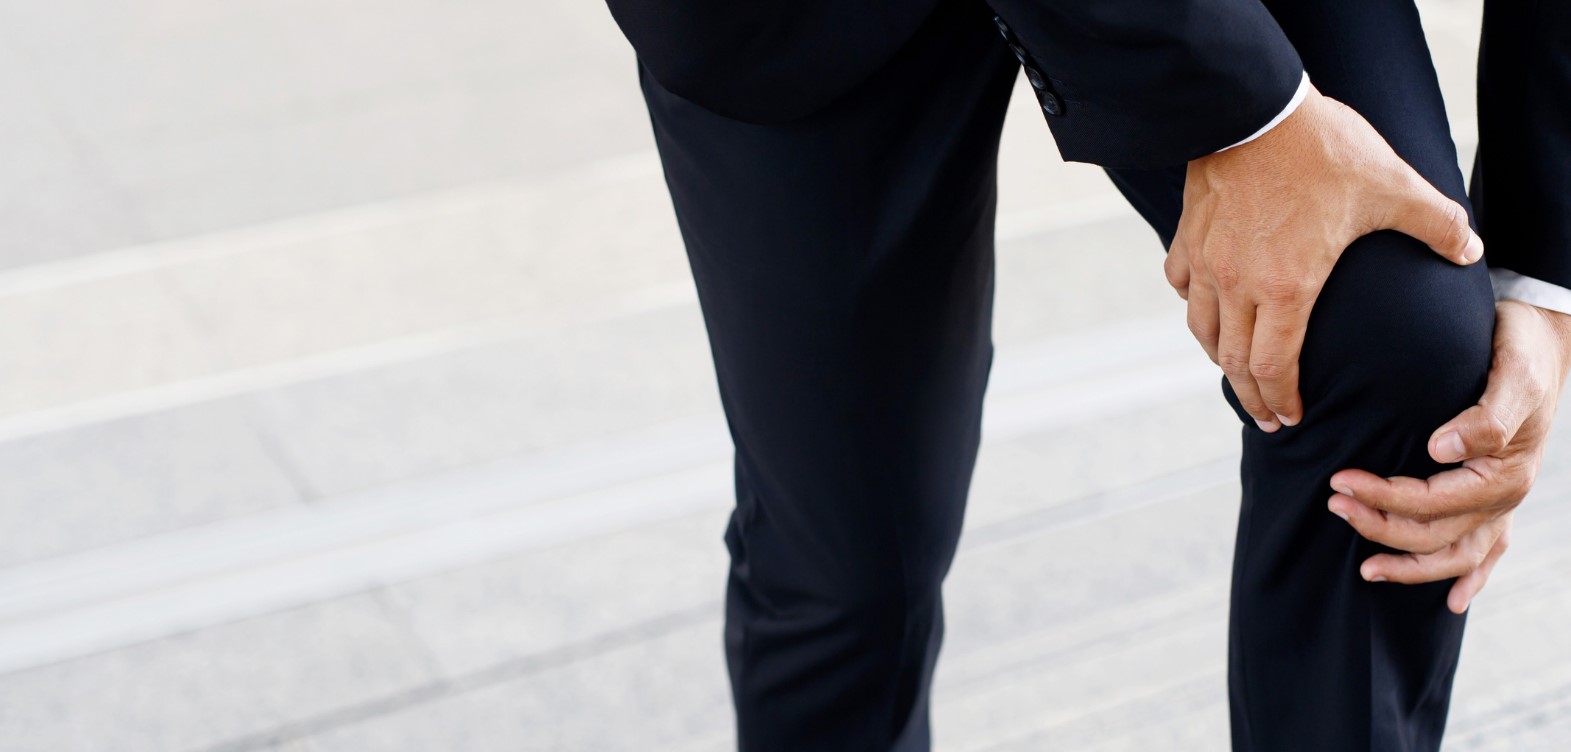 Male in dark suit holding painful knee with two hands